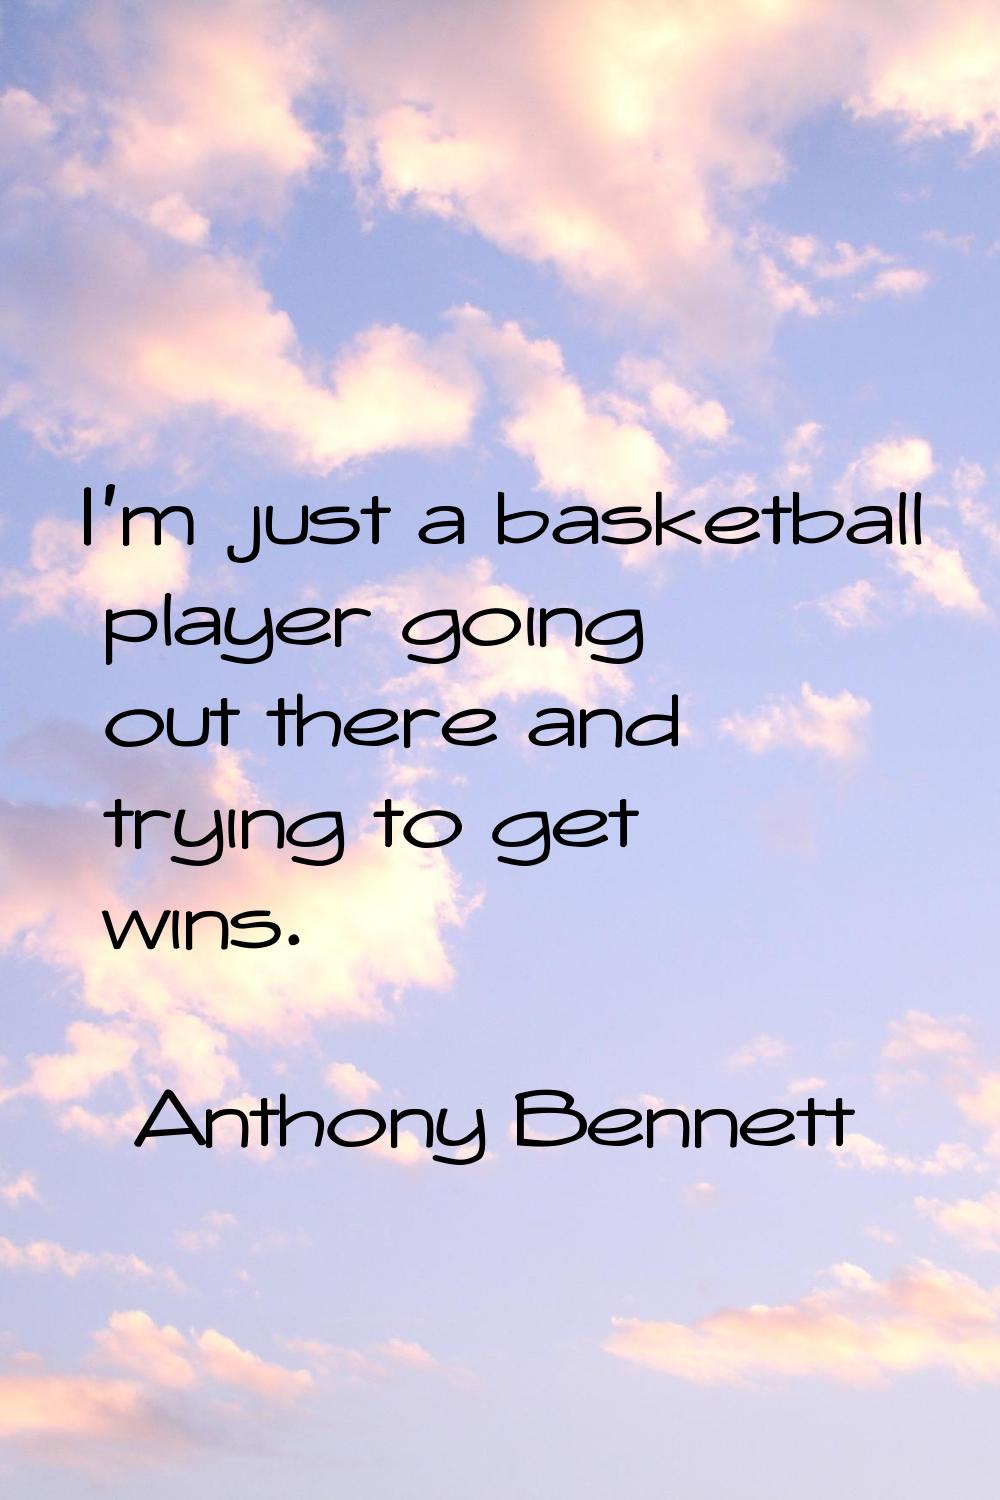 I'm just a basketball player going out there and trying to get wins.